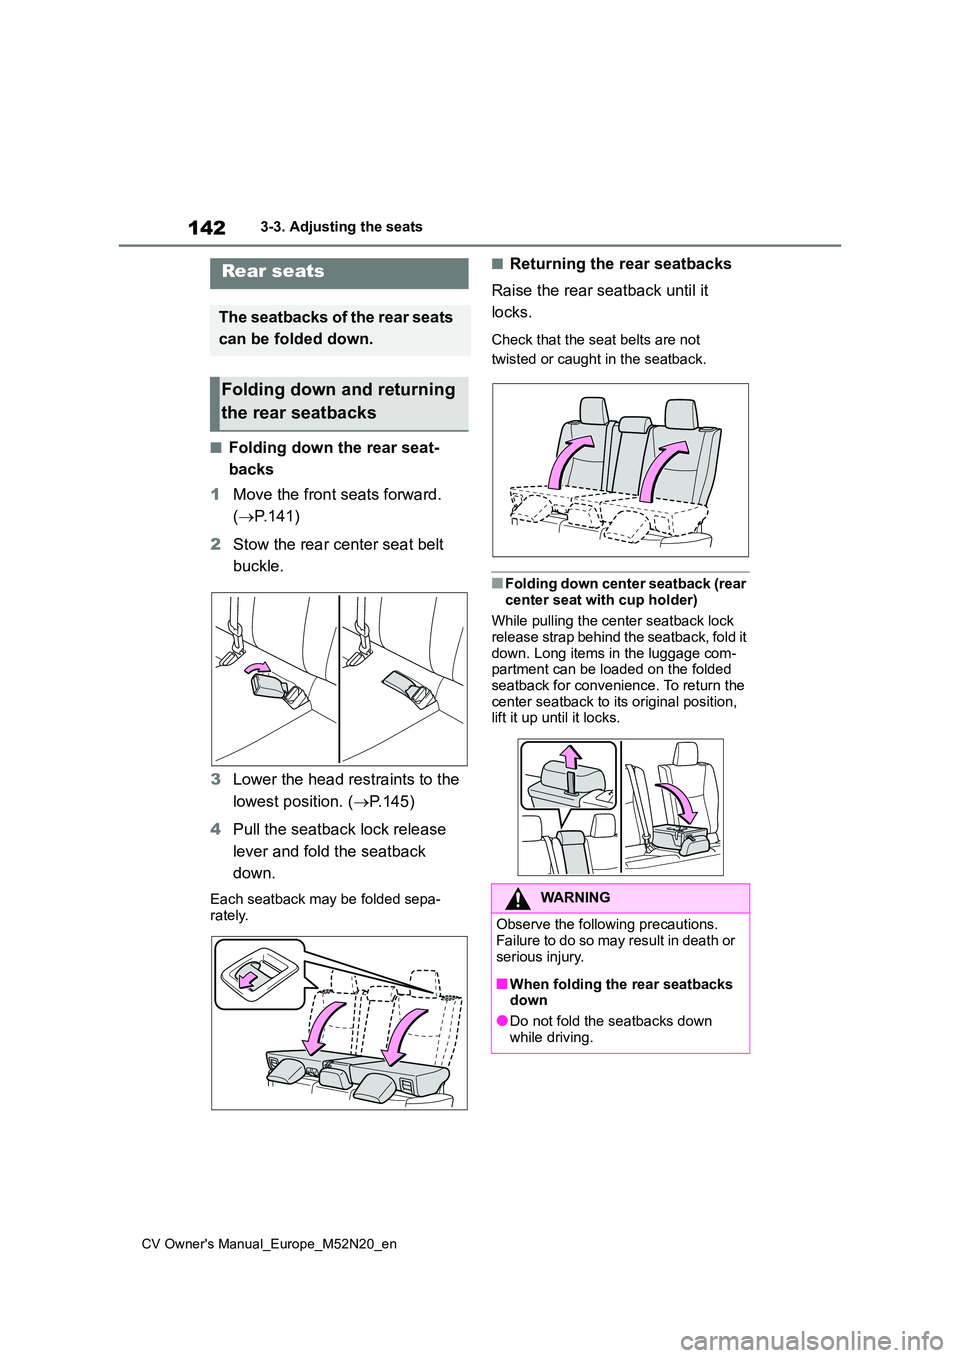 TOYOTA YARIS CROSS 2022  Owners Manual 142
CV Owner's Manual_Europe_M52N20_en
3-3. Adjusting the seats
■Folding down the rear seat- 
backs 
1 Move the front seats forward.  
( P.141) 
2 Stow the rear center seat belt  
buckle. 
3 